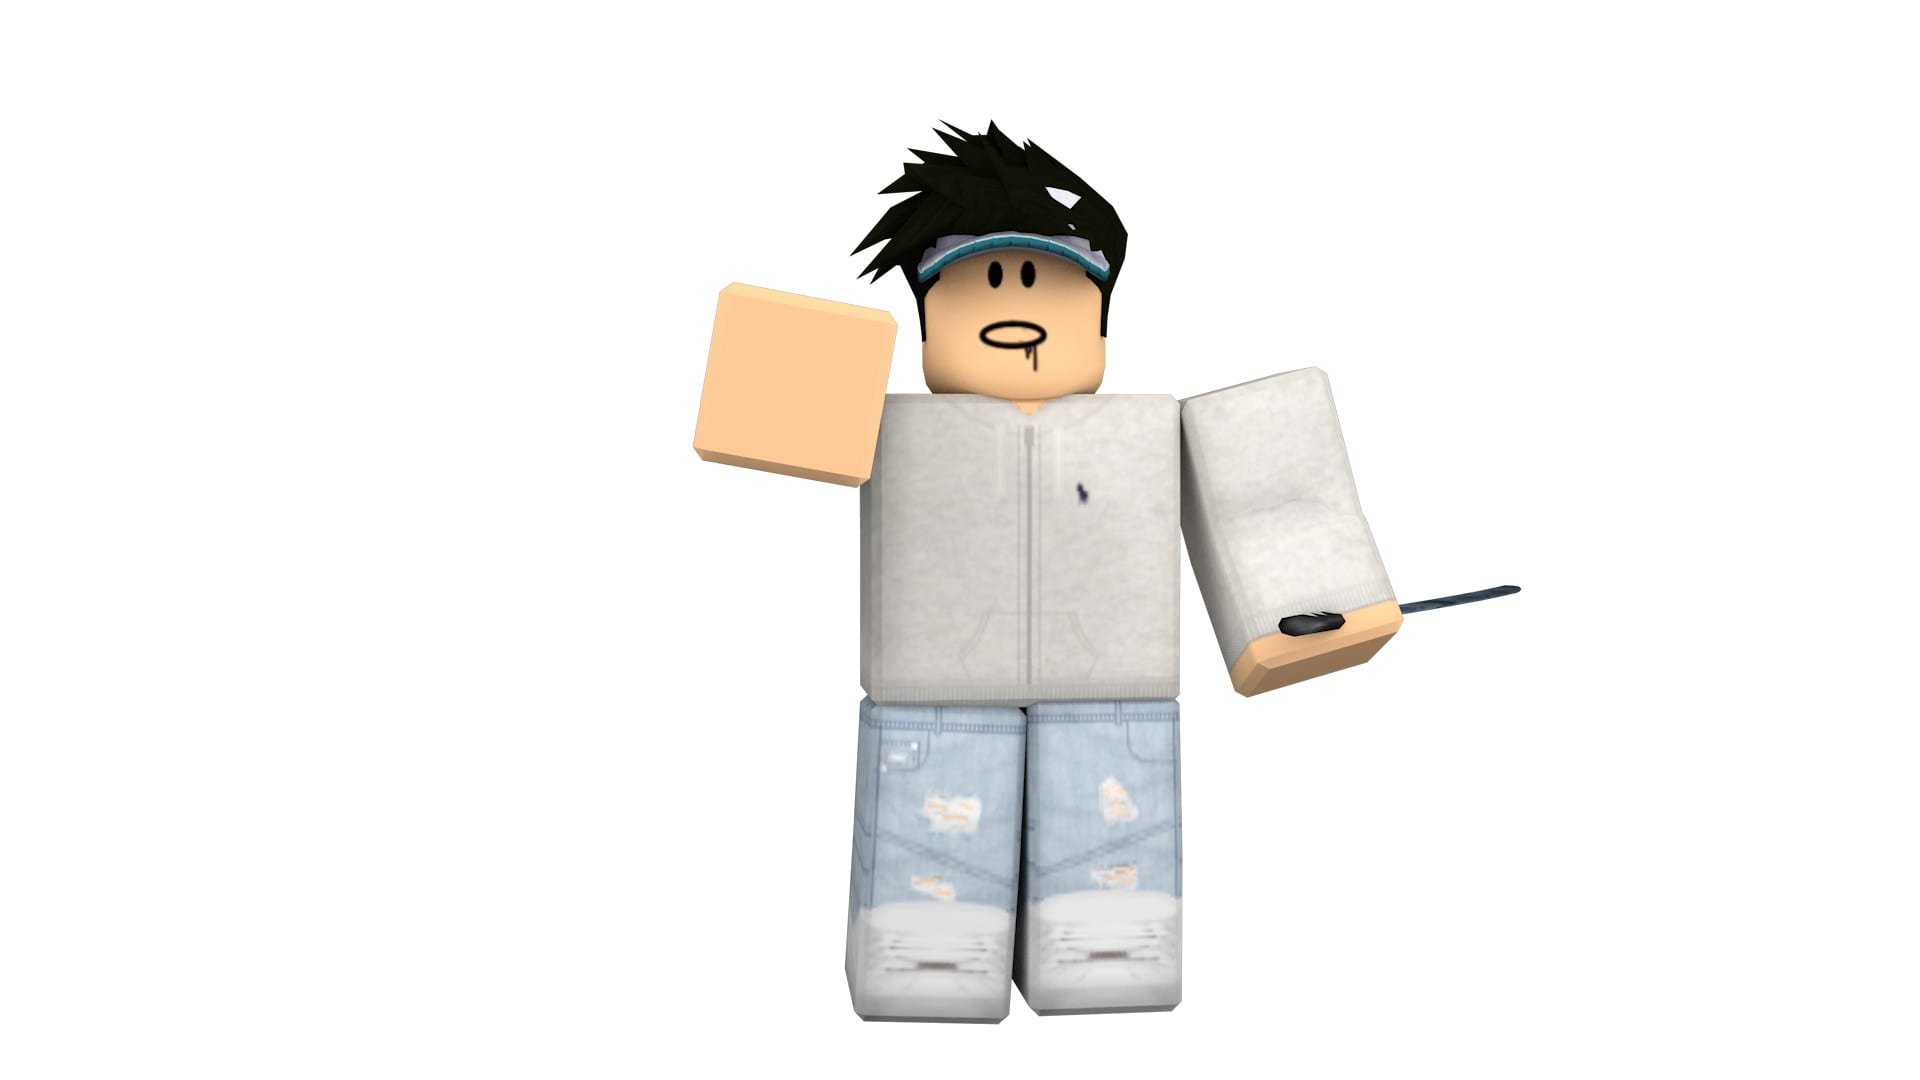 Get Your Own Roblox Gfx By Fruitymoon - get your own roblox gfx